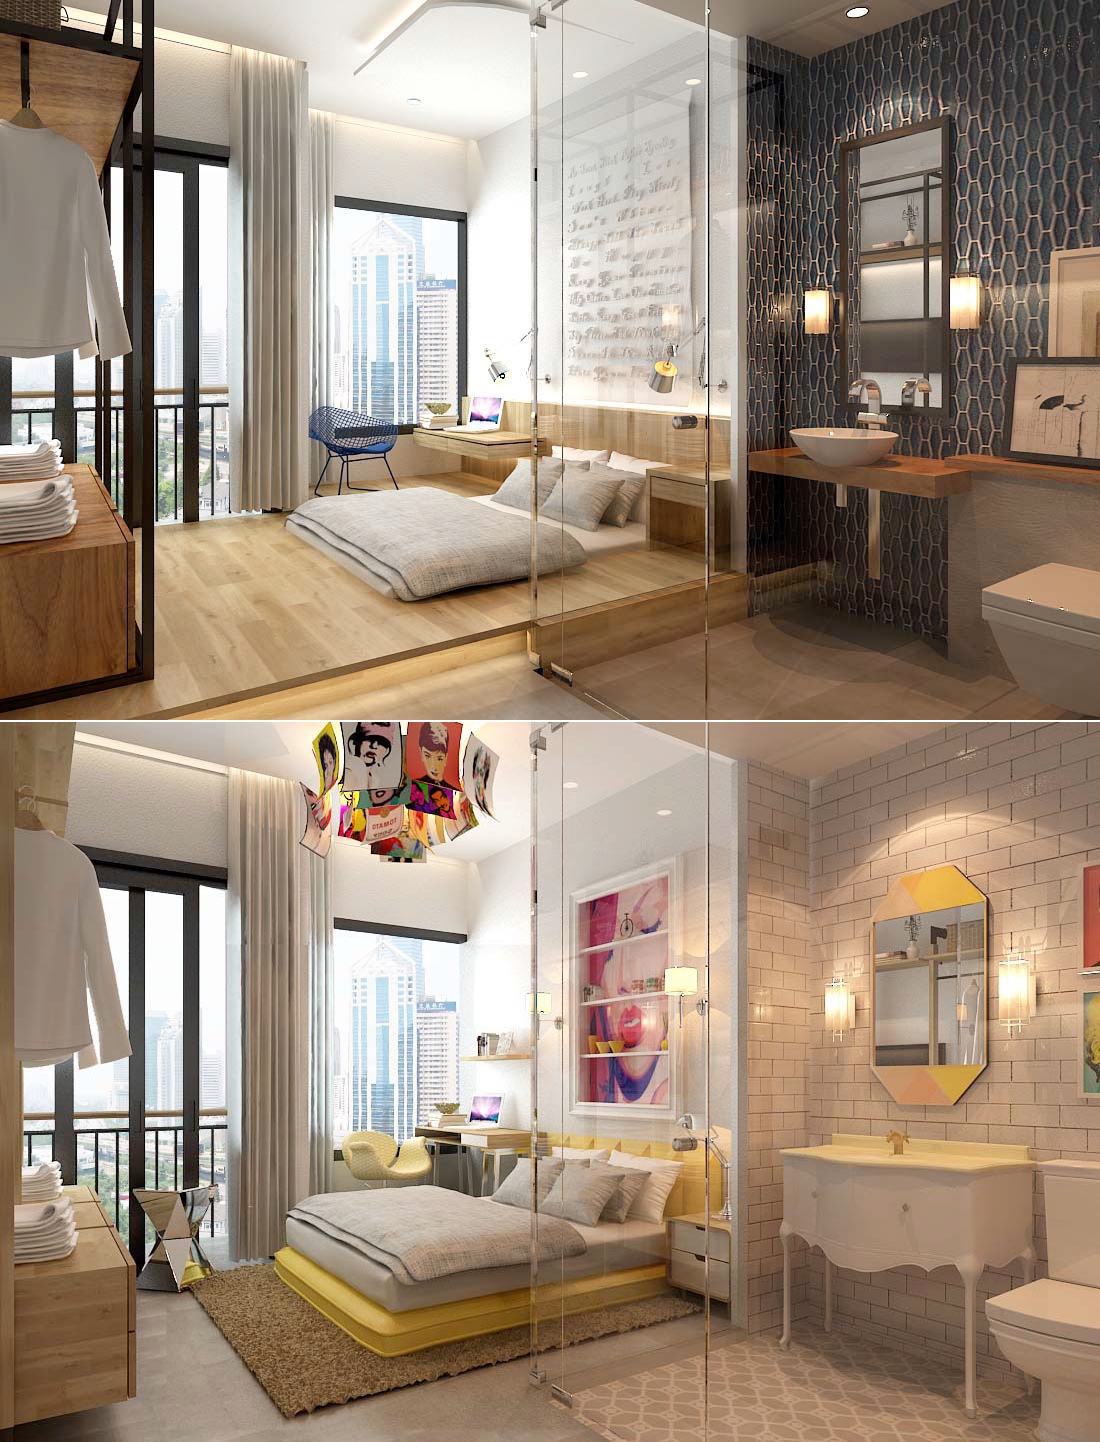 modern bedroom design "width =" 1100 "height =" 1442 "srcset =" https://mileray.com/wp-content/uploads/2020/05/1588509222_486_Applying-Modern-Bedroom-Designs-Below-Decorated-With-a-Variety-of.jpeg 1100w, https://mileray.com/ wp -content / uploads / 2016/09 / Linda-Yuliana-229x300.jpeg 229w, https://mileray.com/wp-content/uploads/2016/09/Linda-Yuliana-768x1007.jpeg 768w, https: // myfashionos .com / wp-content / uploads / 2016/09 / Linda-Yuliana-781x1024.jpeg 781w, https://mileray.com/wp-content/uploads/2016/09/Linda-Yuliana-696x912.jpeg 696w, https : //mileray.com/wp-content/uploads/2016/09/Linda-Yuliana-1068x1400.jpeg 1068w, https://mileray.com/wp-content/uploads/2016/09/Linda-Yuliana-320x420. jpeg 320w "sizes =" (maximum width: 1100px) 100vw, 1100px